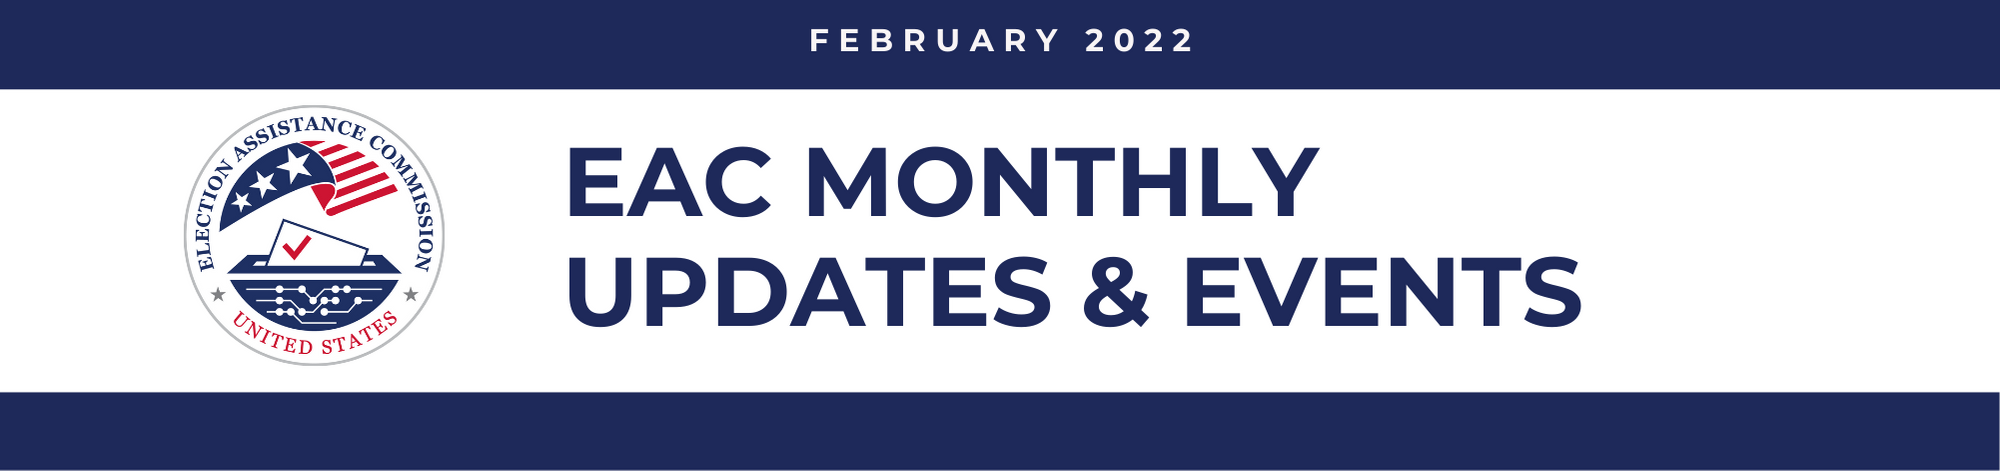 February 2022 EAC Monthly Updates & Events